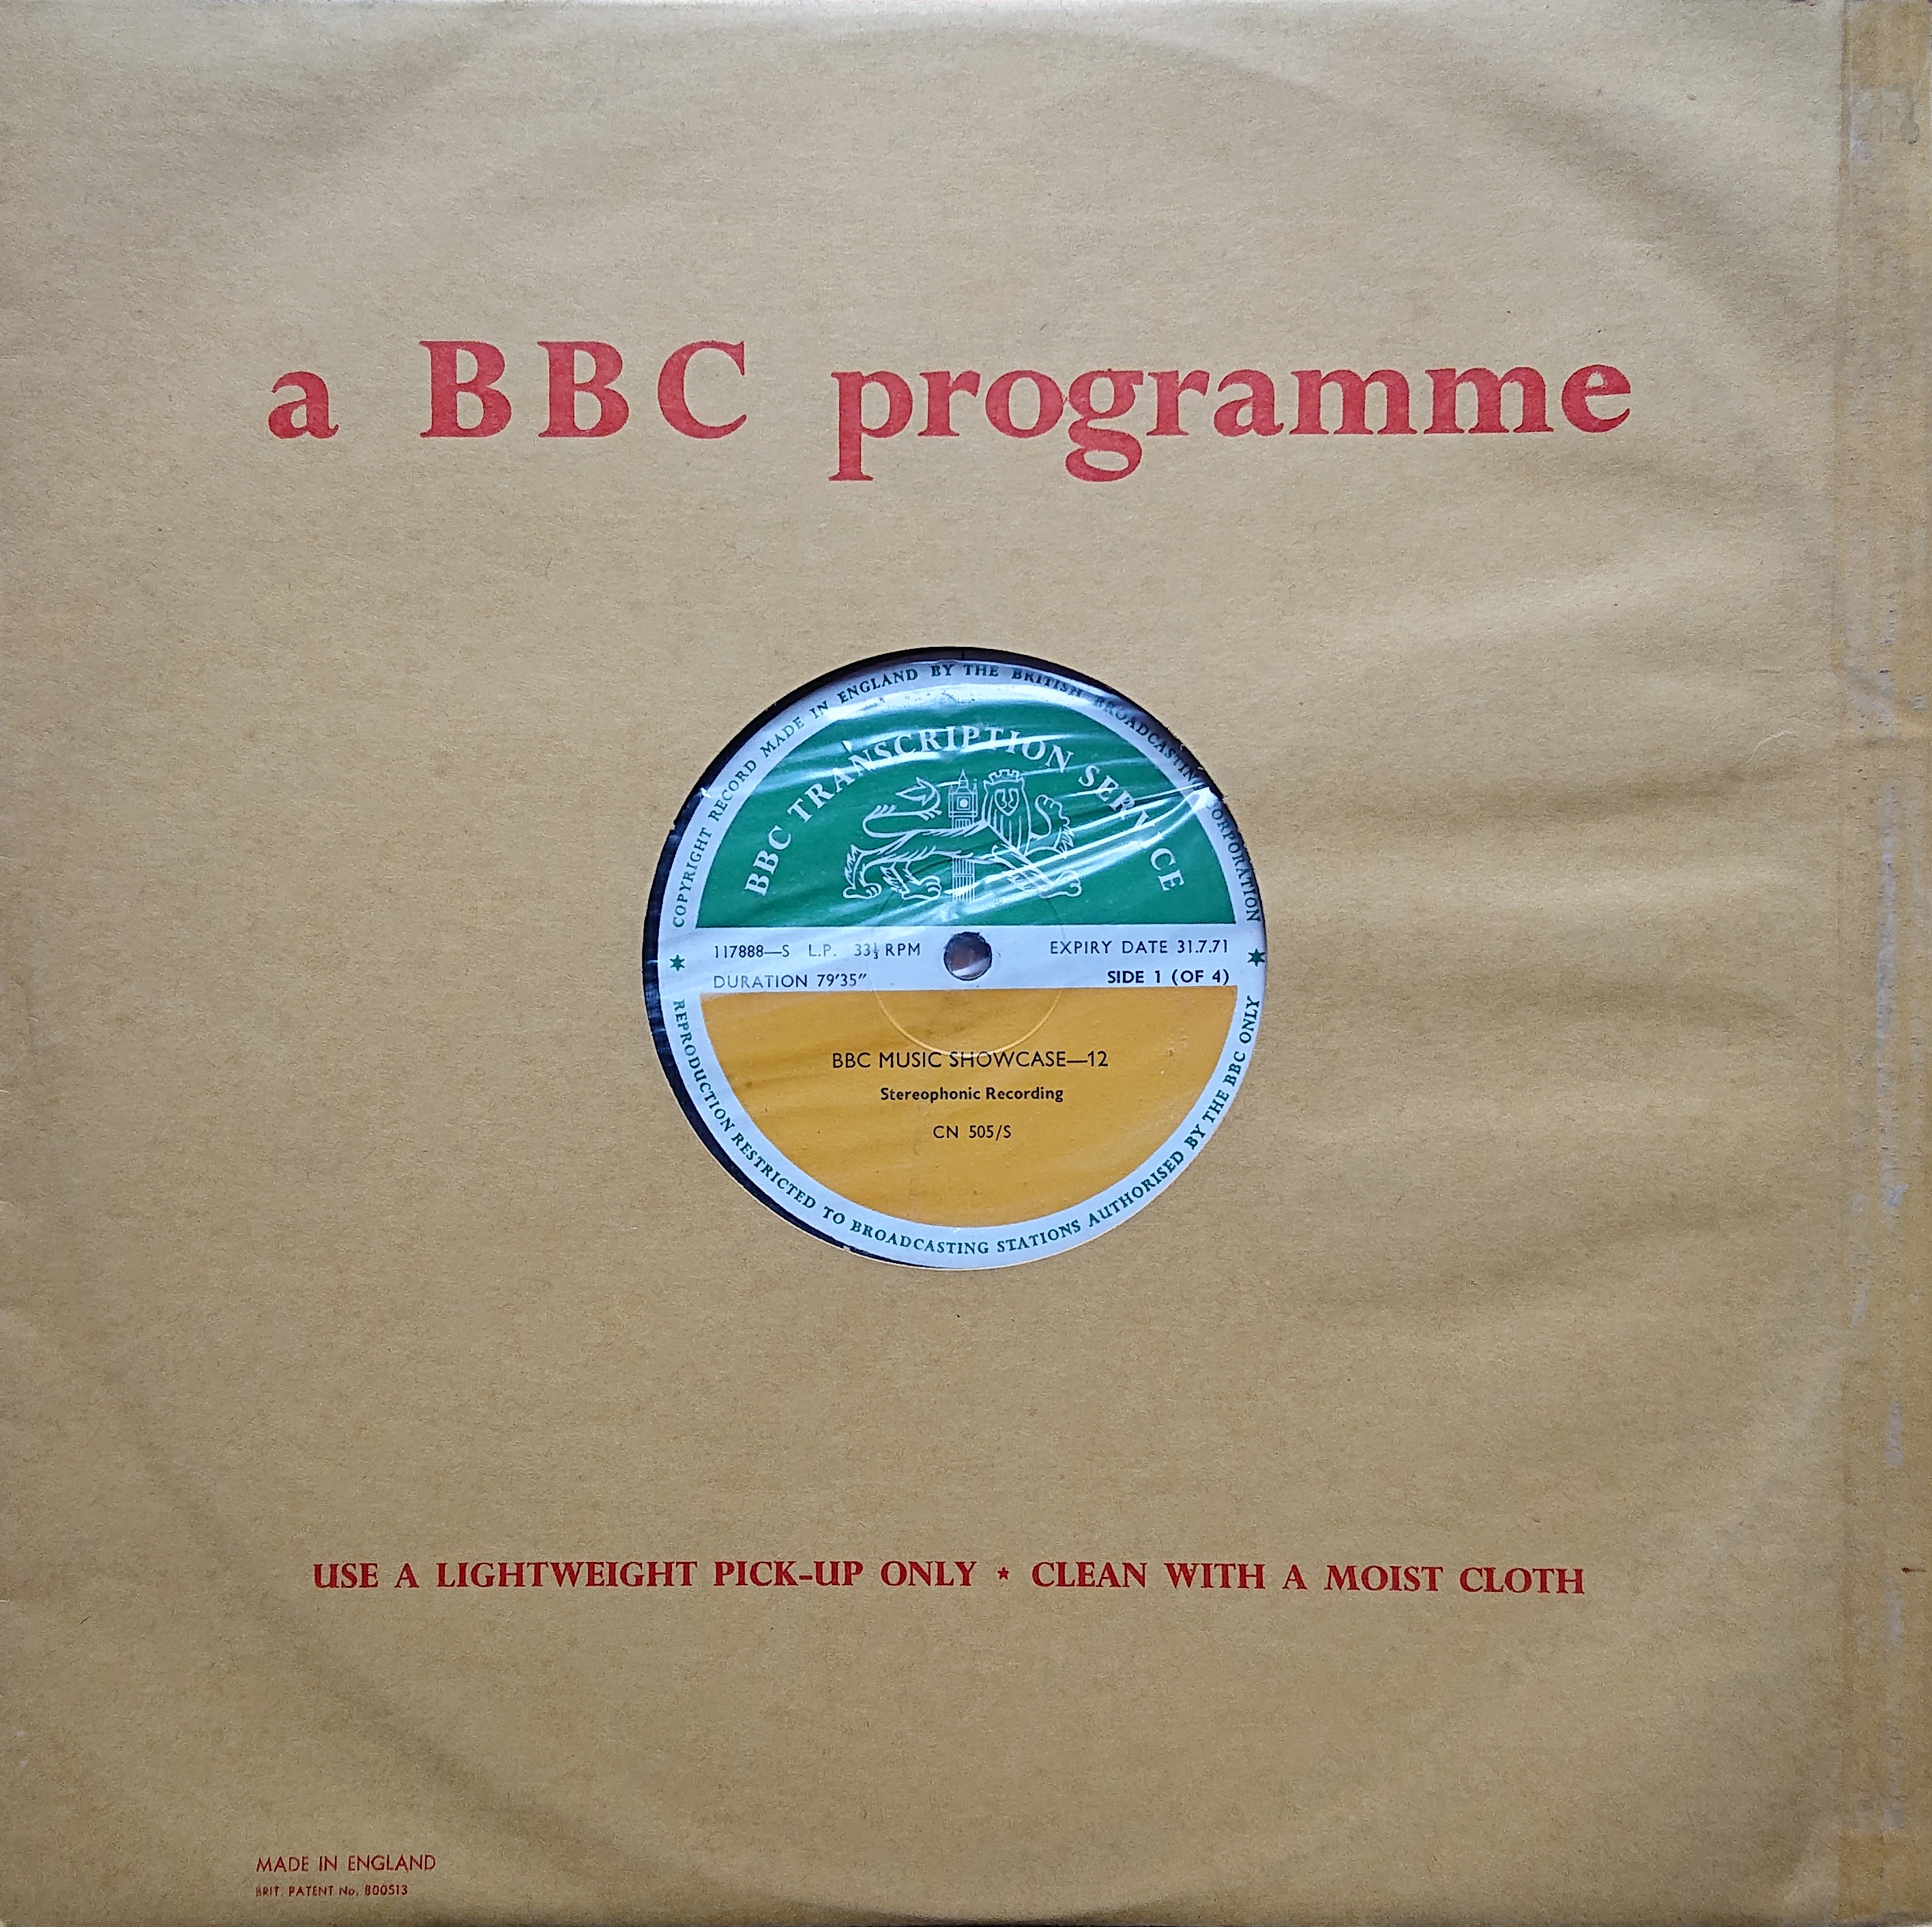 Picture of CN 505 S 23 BBC music showcase - 12 (Sides 1 & 3) by artist Various from the BBC records and Tapes library